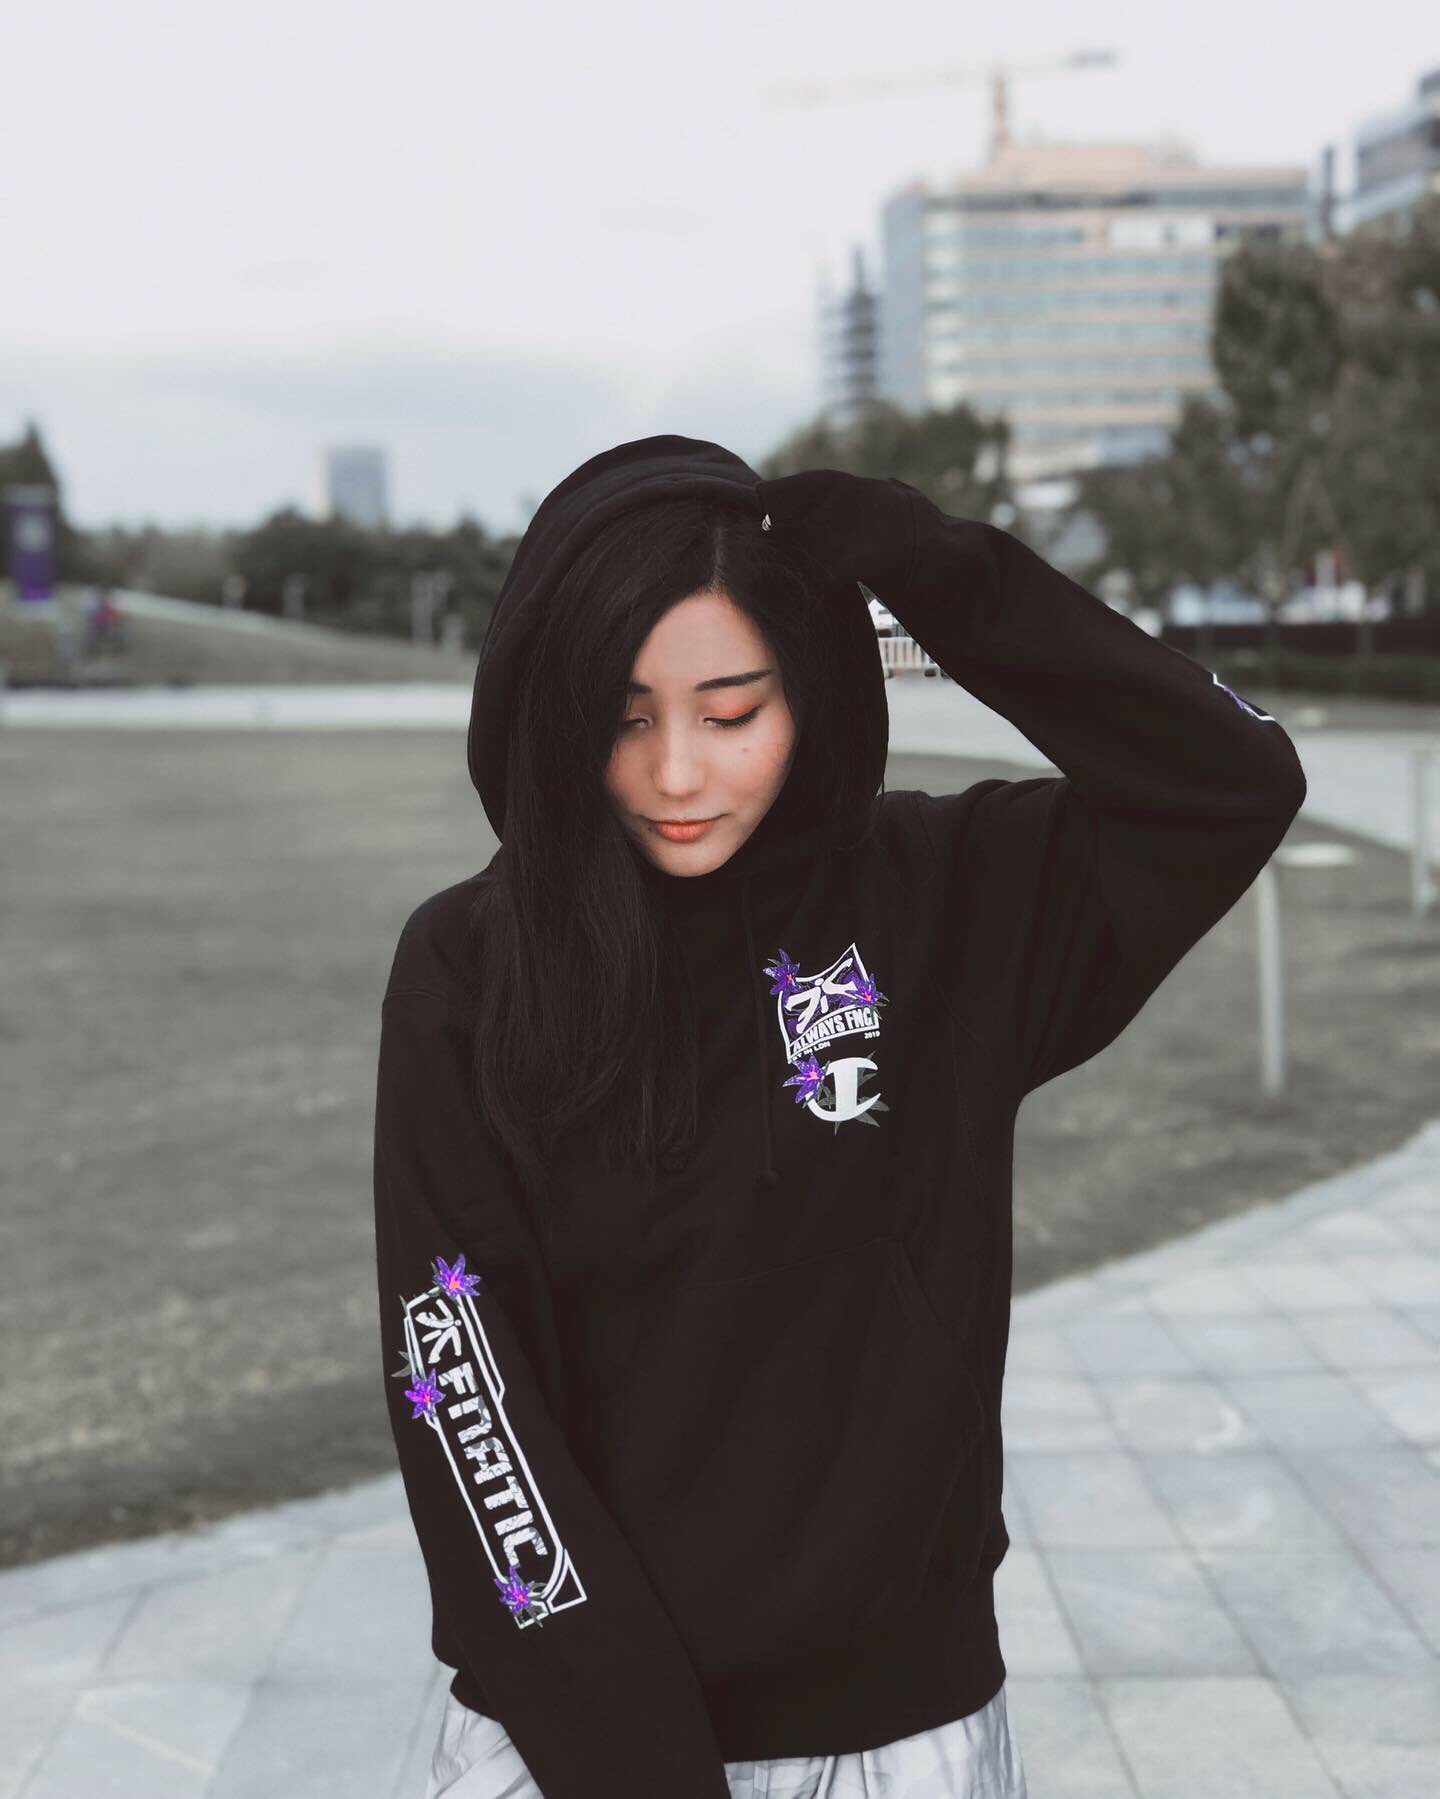 on X: "FNATIC x CHAMPION night flower limited edition hoodie available only this 29th August. https://t.co/VfDPinXgLs / X